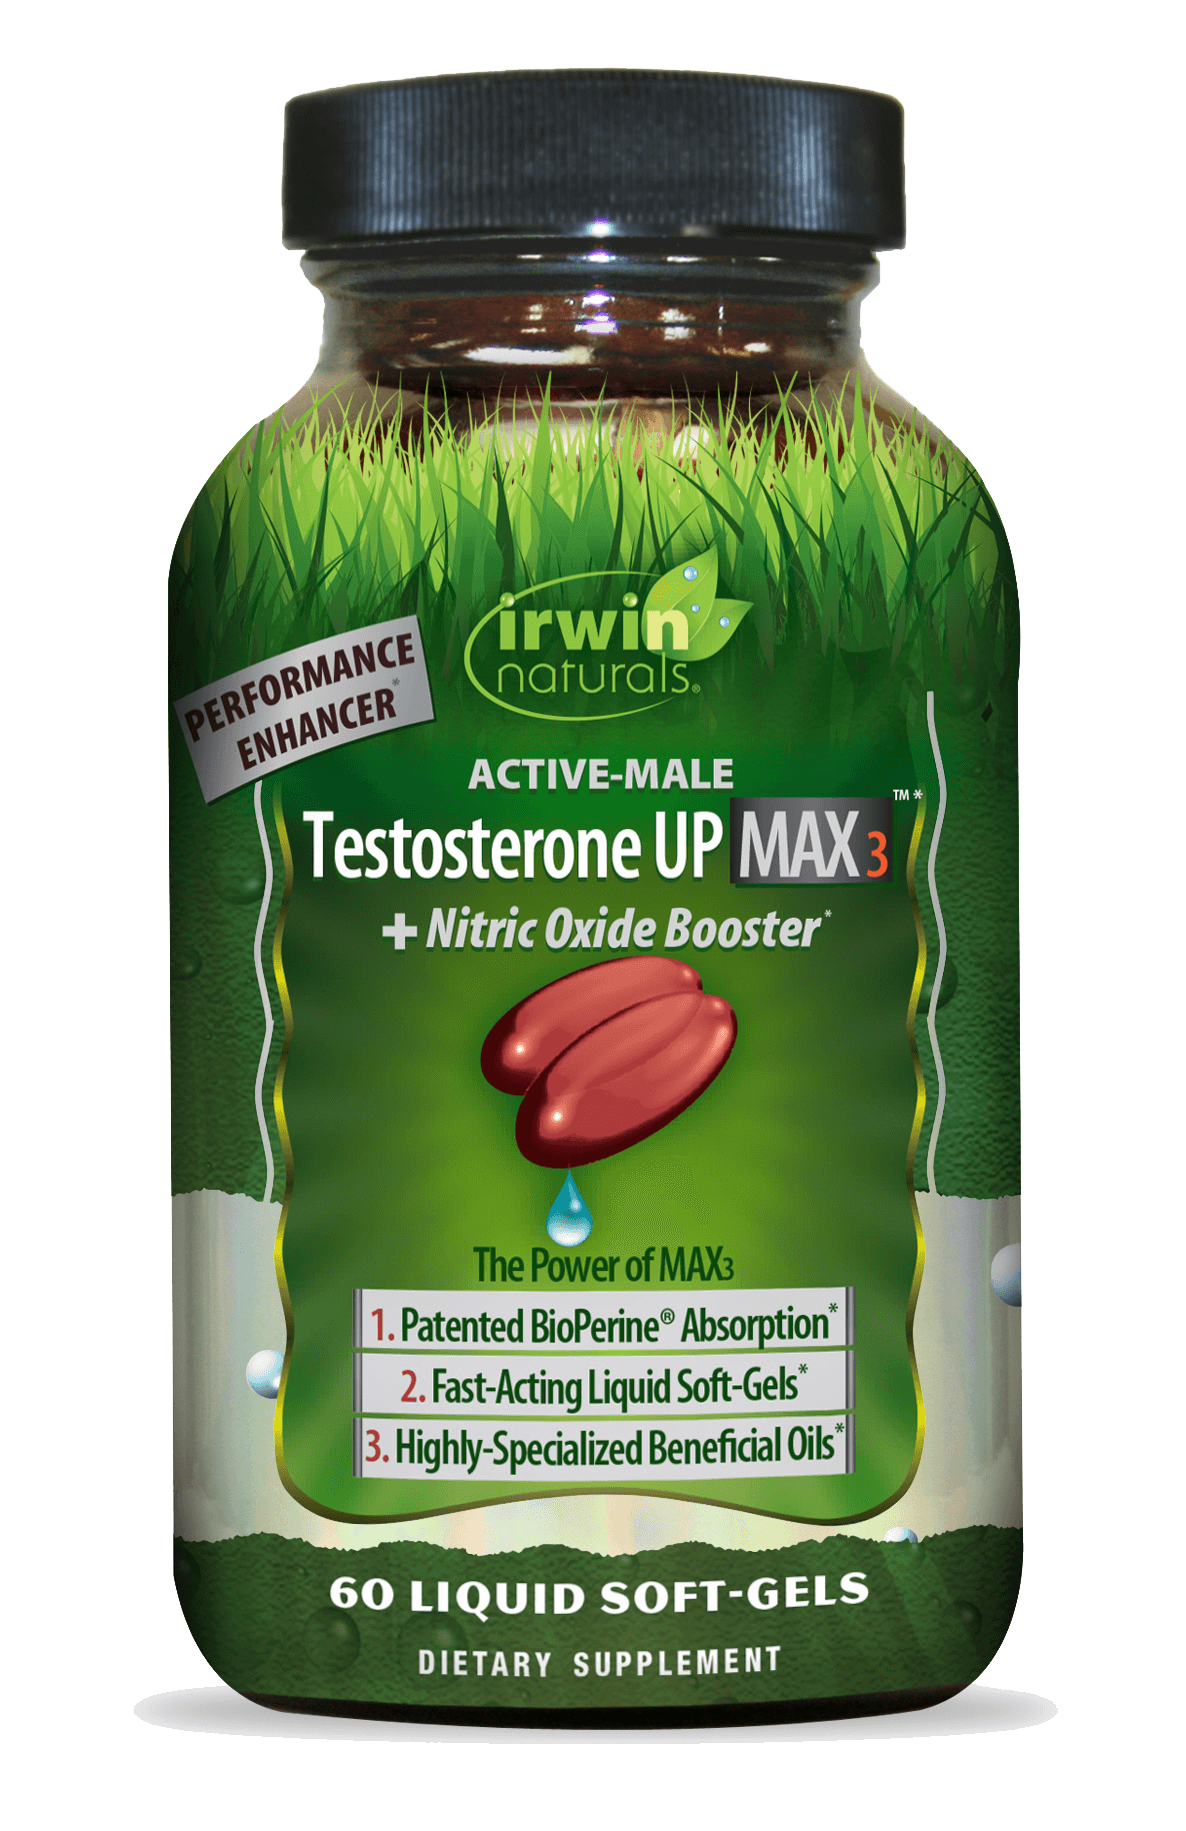 Active Male Testosterone UP Max 3 with Nitric Oxide Booster by Irwin Naturals